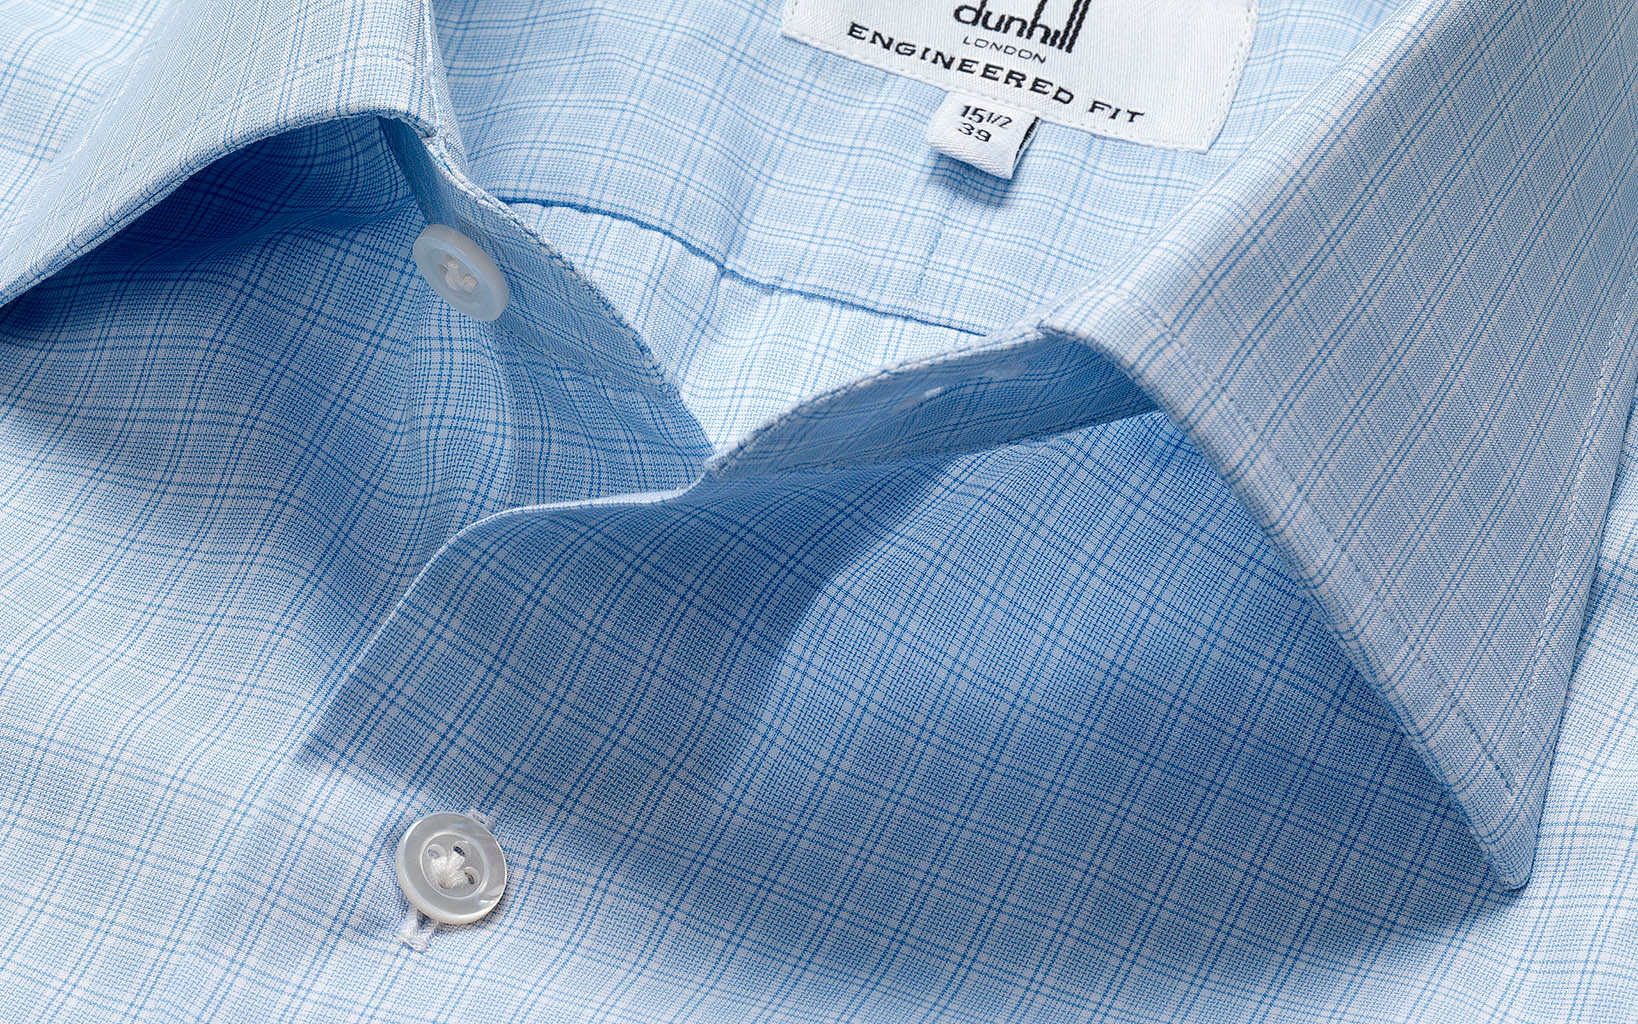 Fashion Photography of Alfred Dunhill shirt close up by Packshot Factory